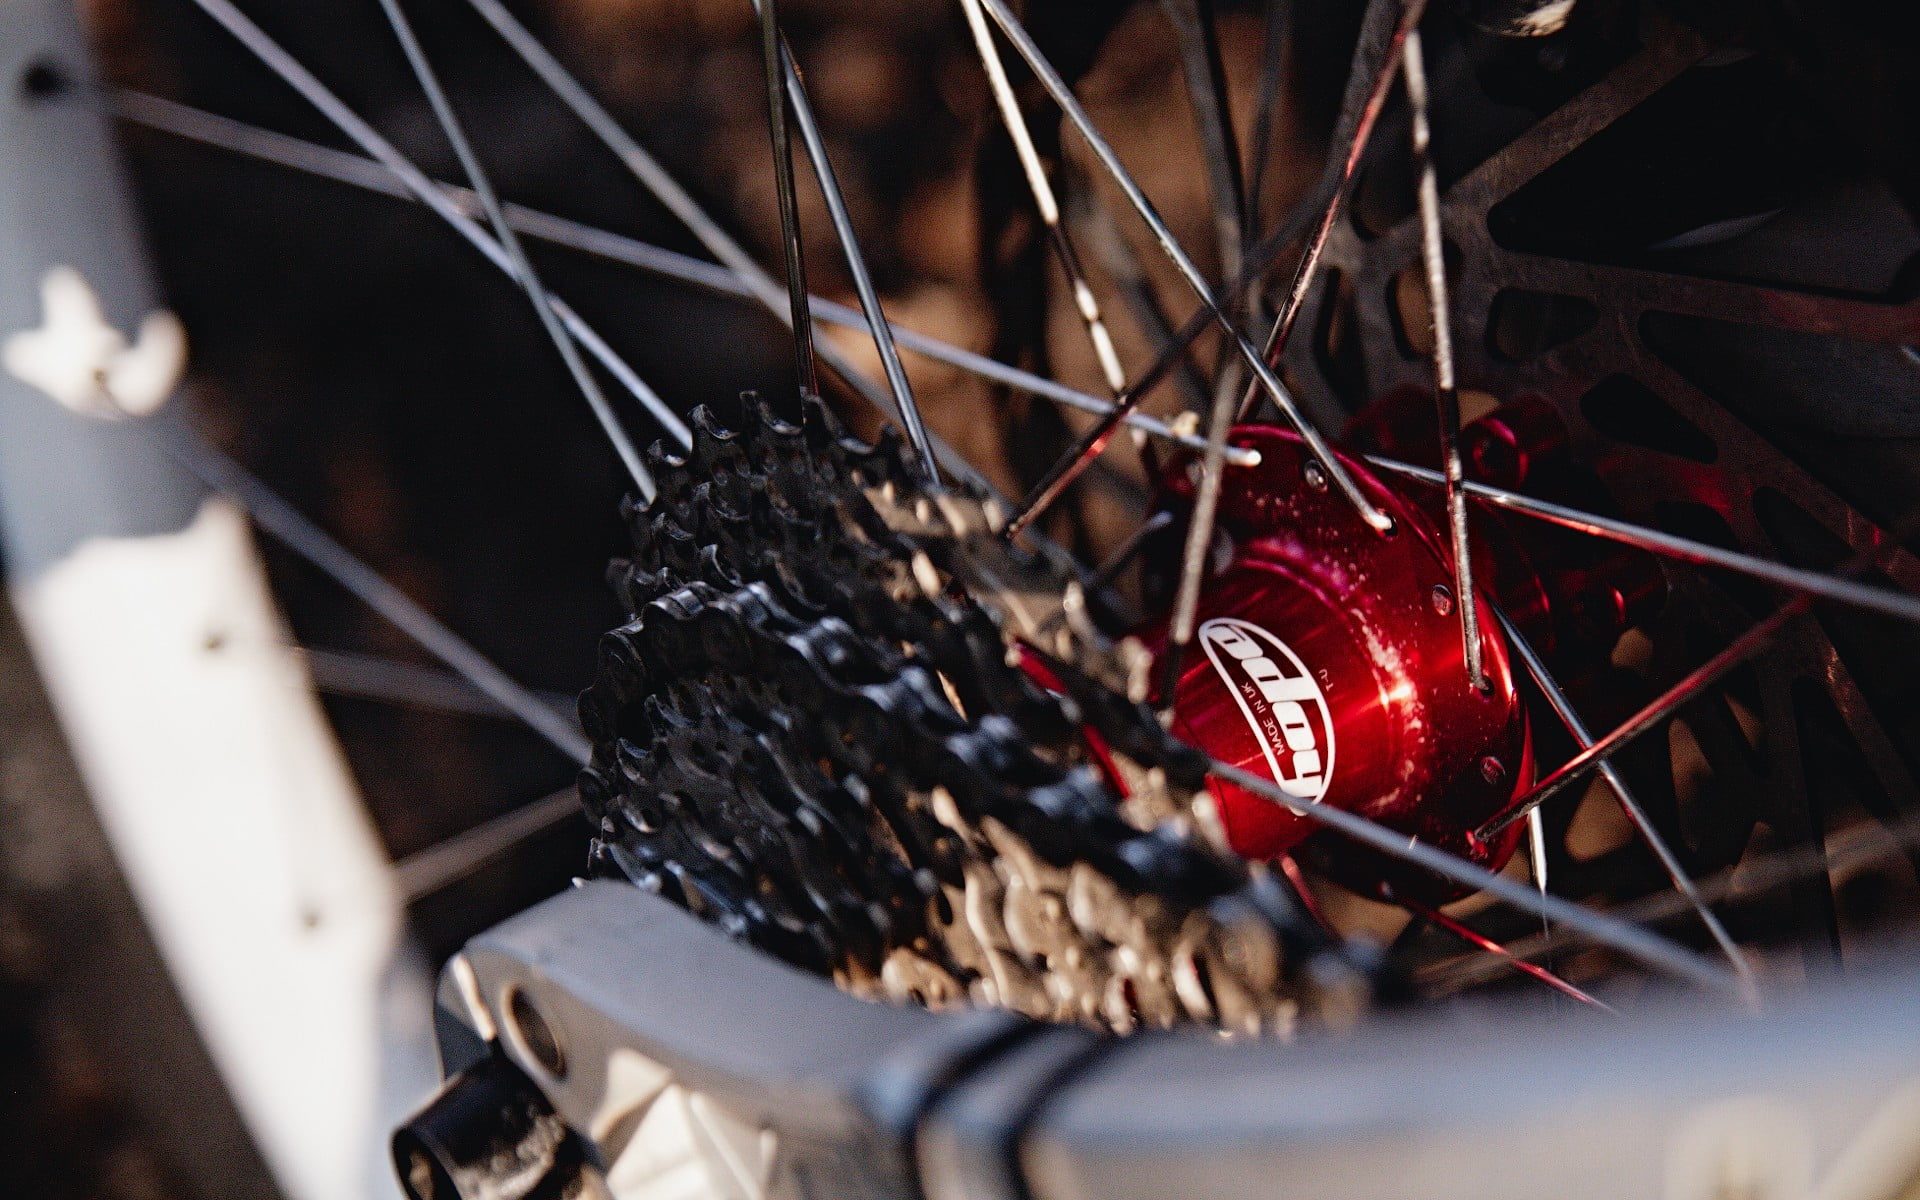 bicycles, bikes, chains, gear, hope, mountain, mtb, speed, wheels